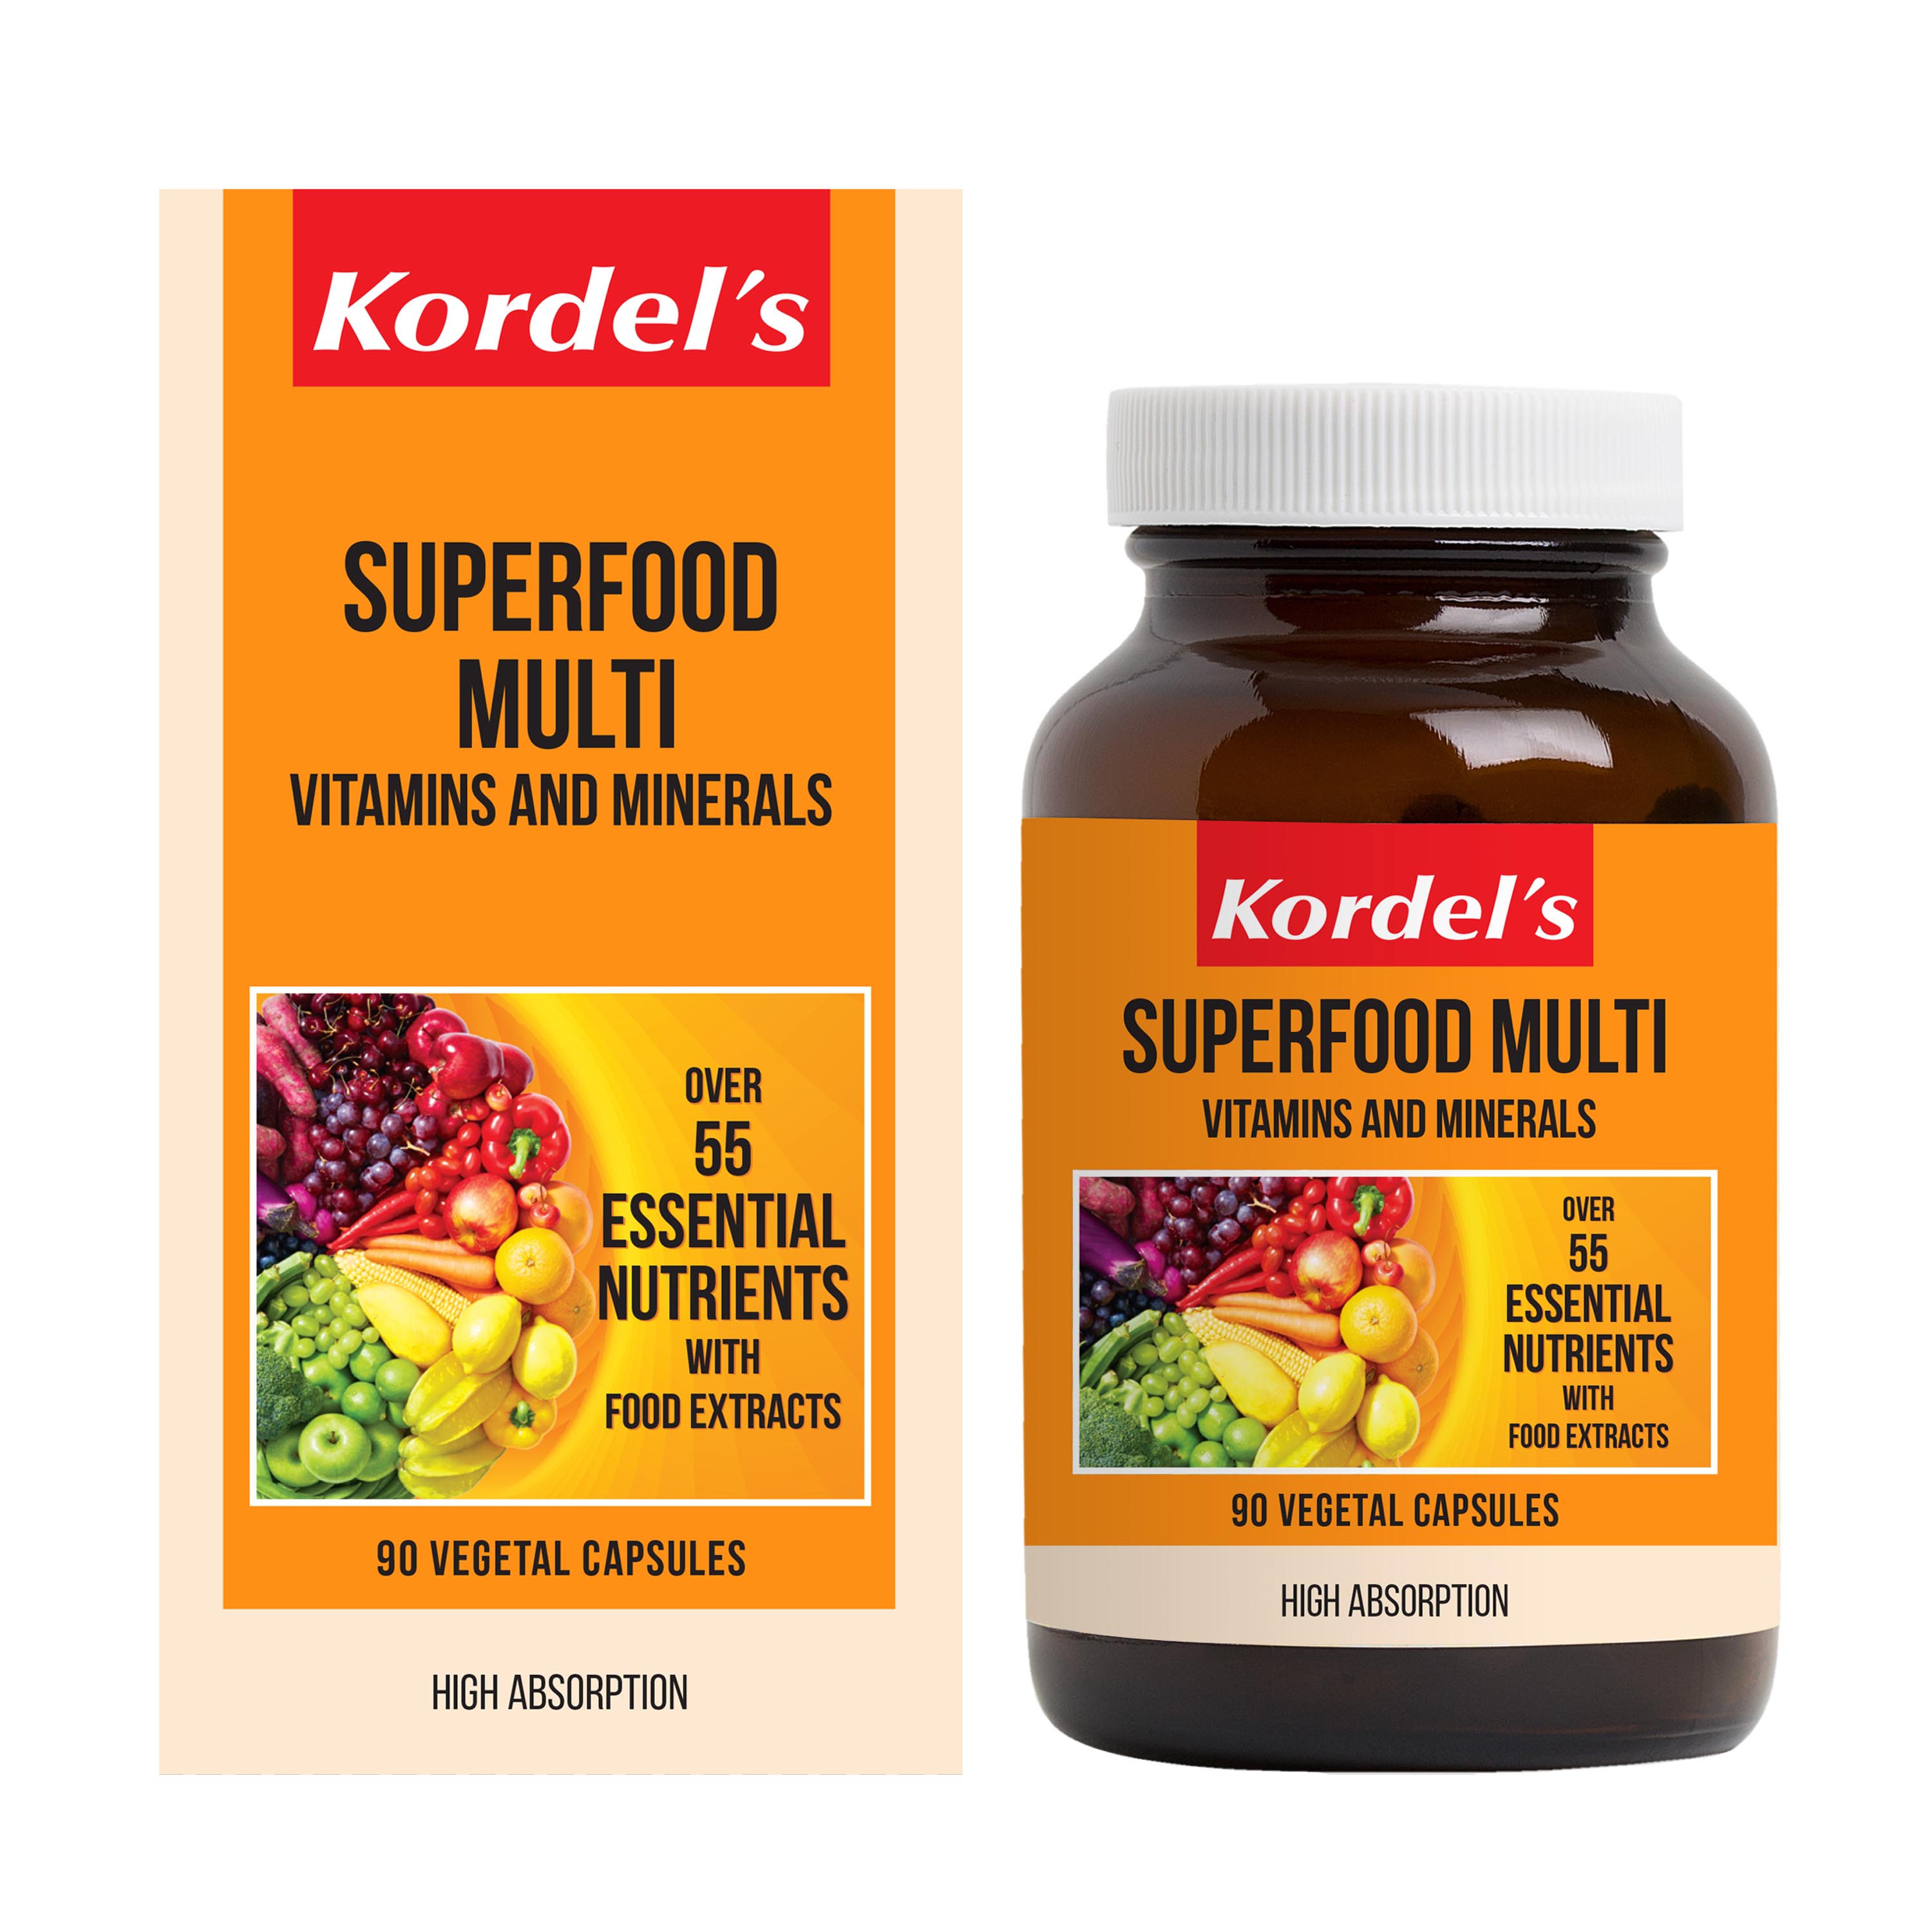 baby-fair Kordel's Superfood Multi Vitamins and Minerals 90 Capsules